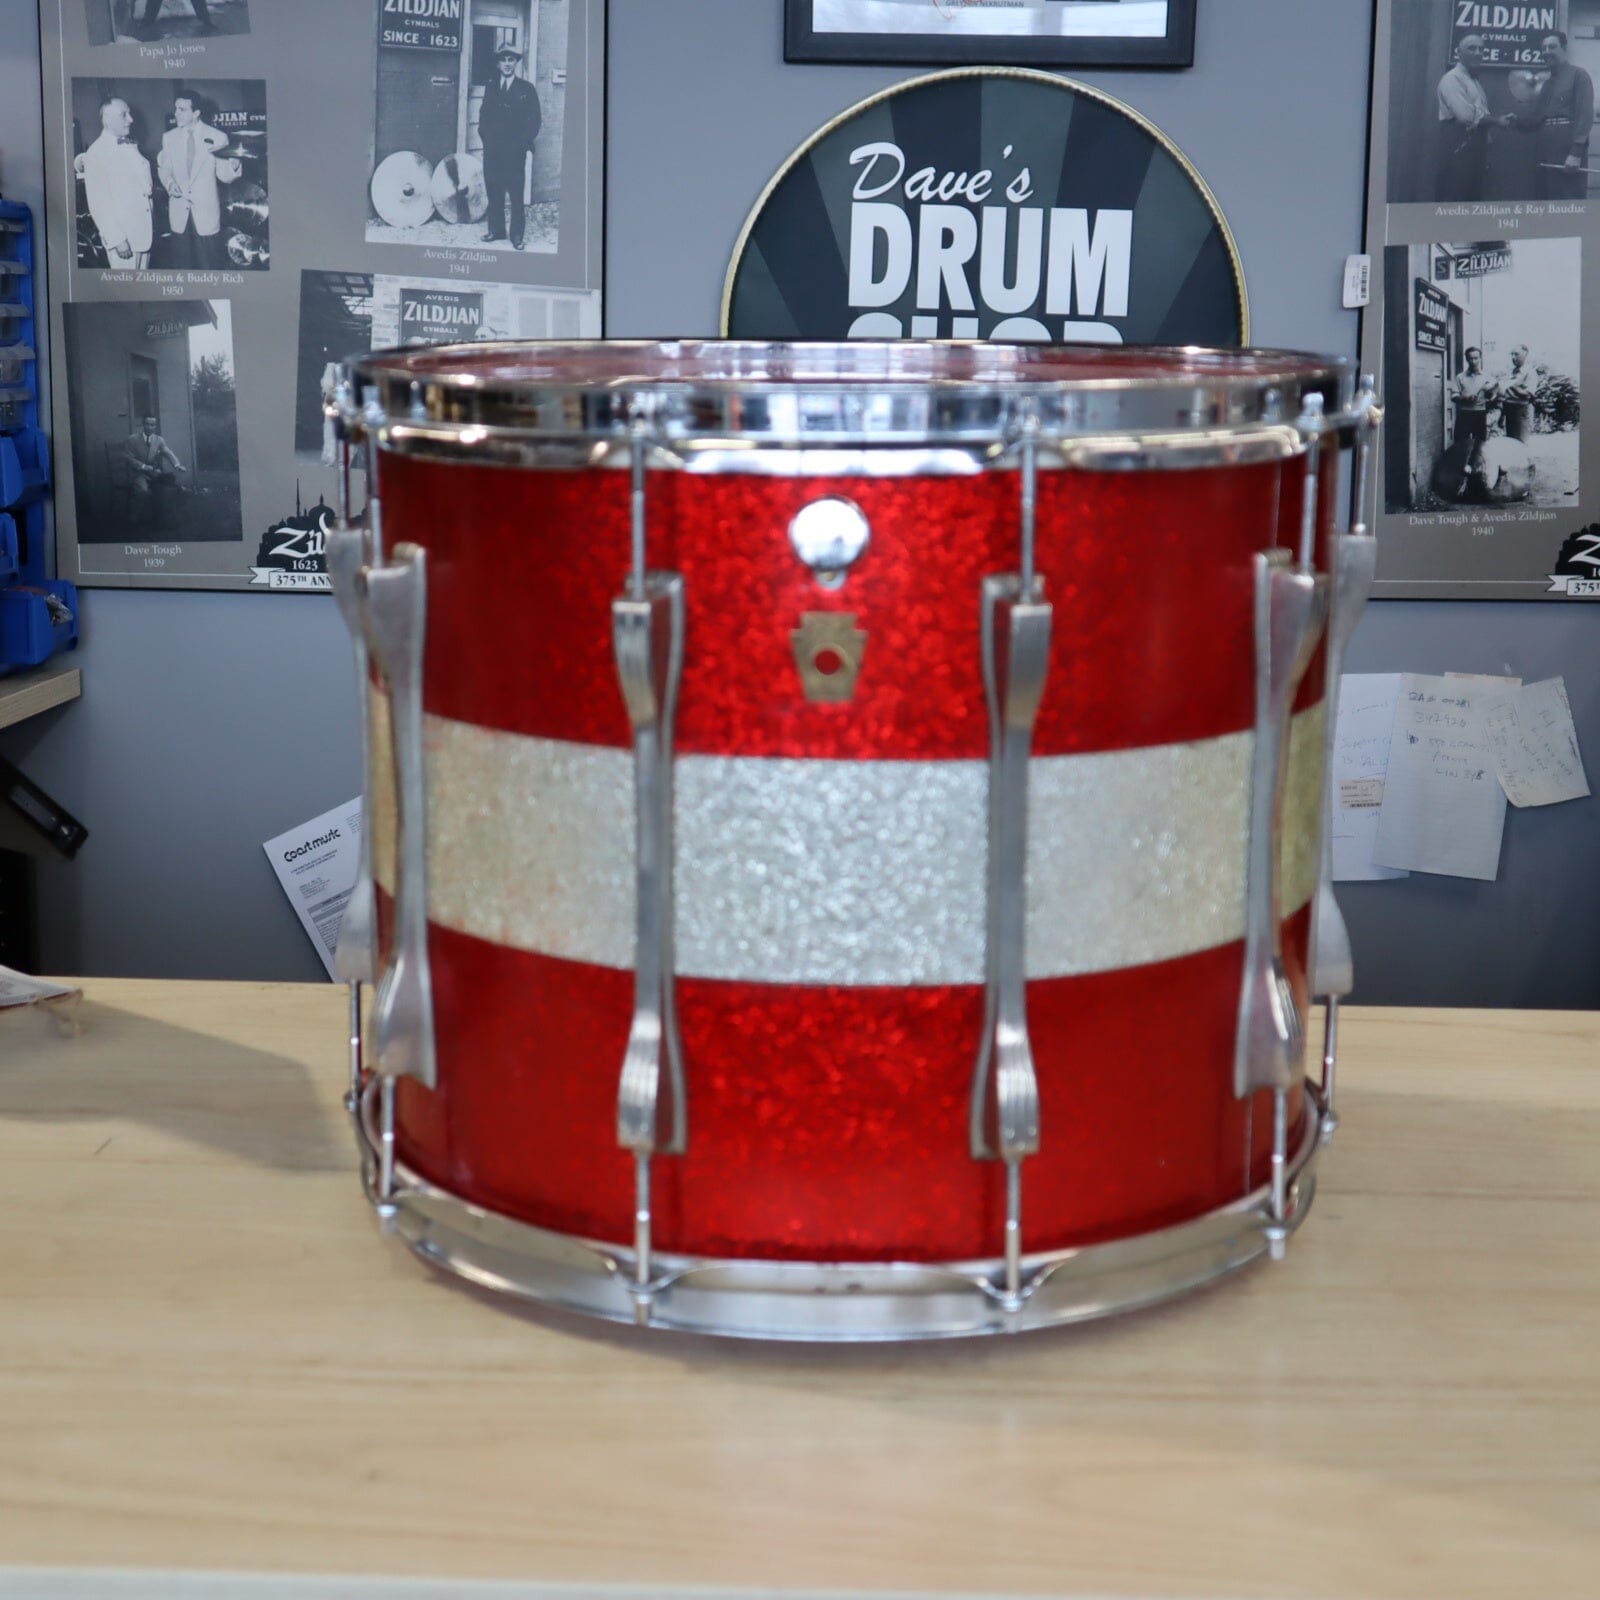 LUDWIG TENOR 15" x 12" Red/Silver CONSIGNMENT DRUM KIT Ludwig 